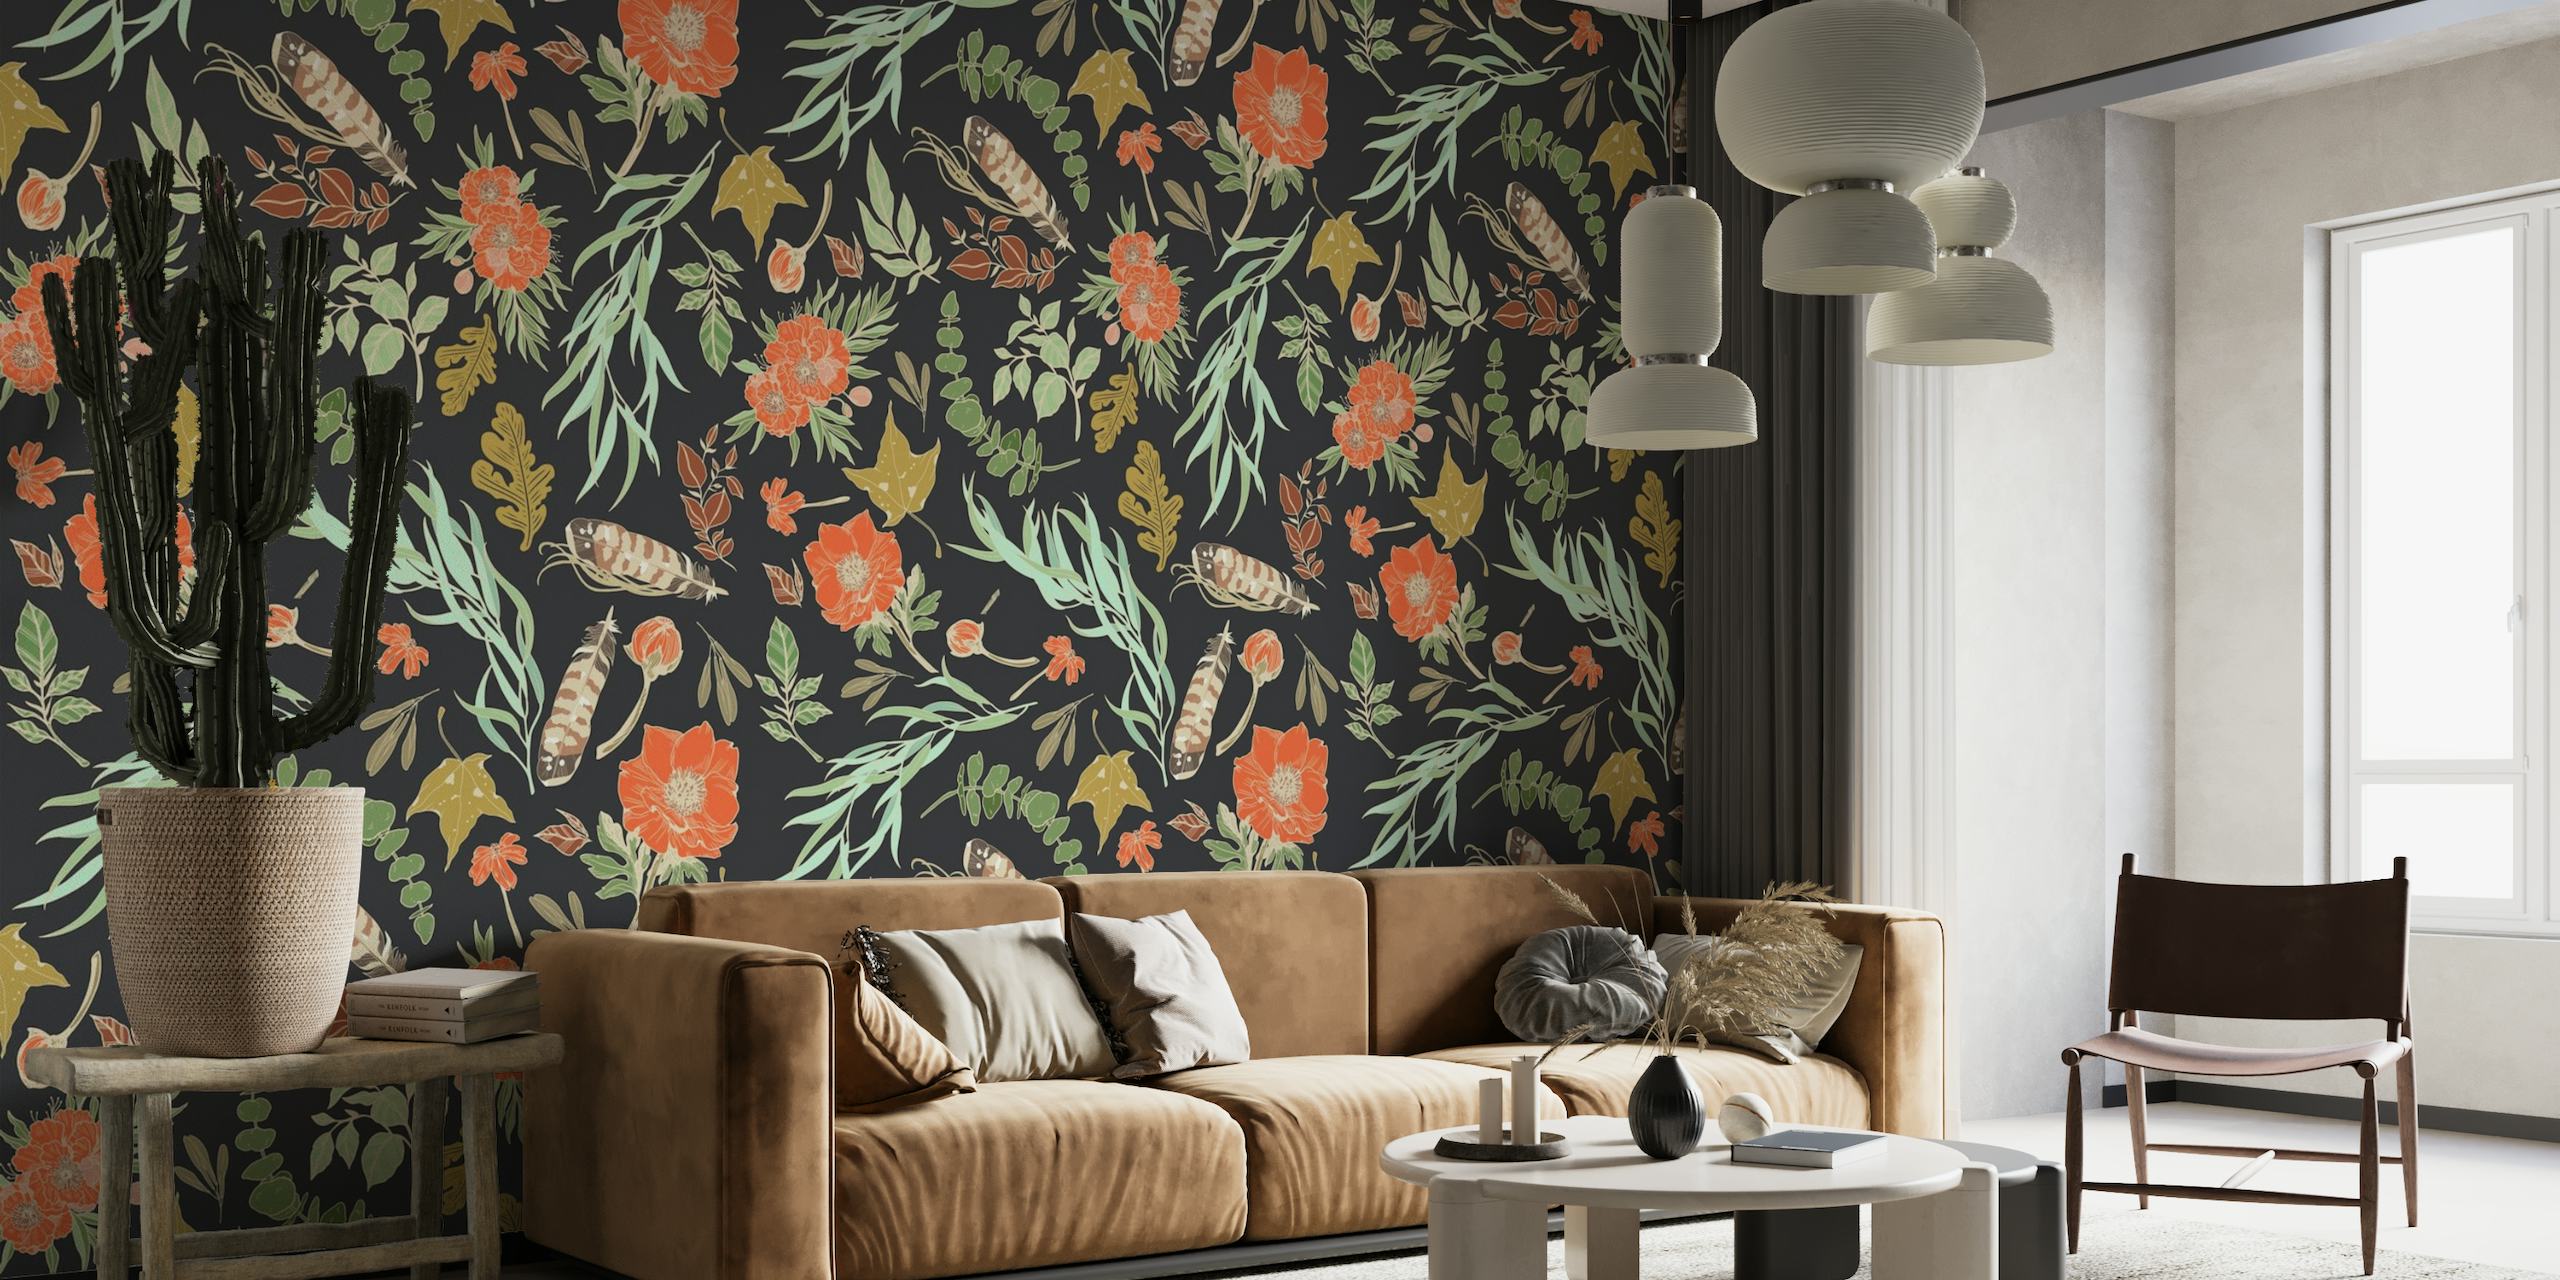 Bohemian-inspired wall mural with vibrant floral and fauna patterns on a dark background